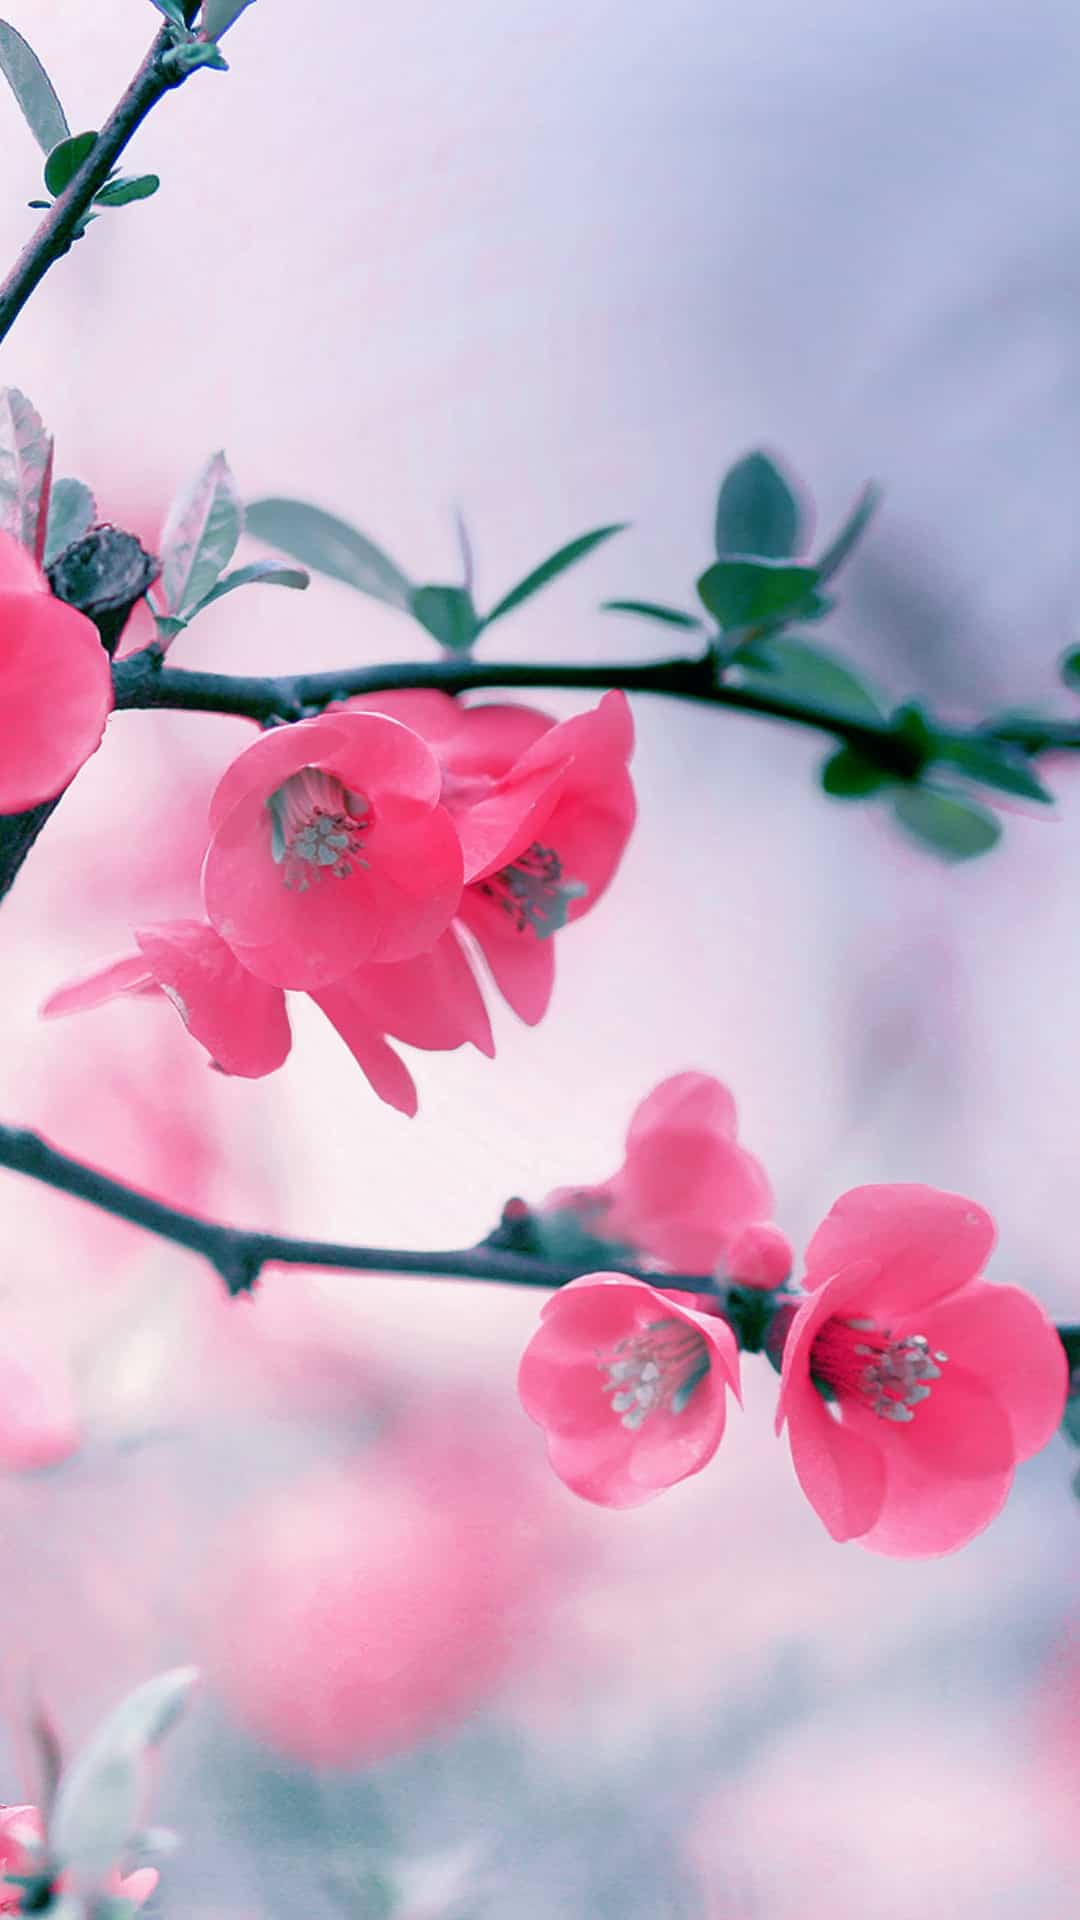 Vintage Pink Blossom Flowers Spring Macro Android Wallpaper Wallpaper Download For Mobile Screen